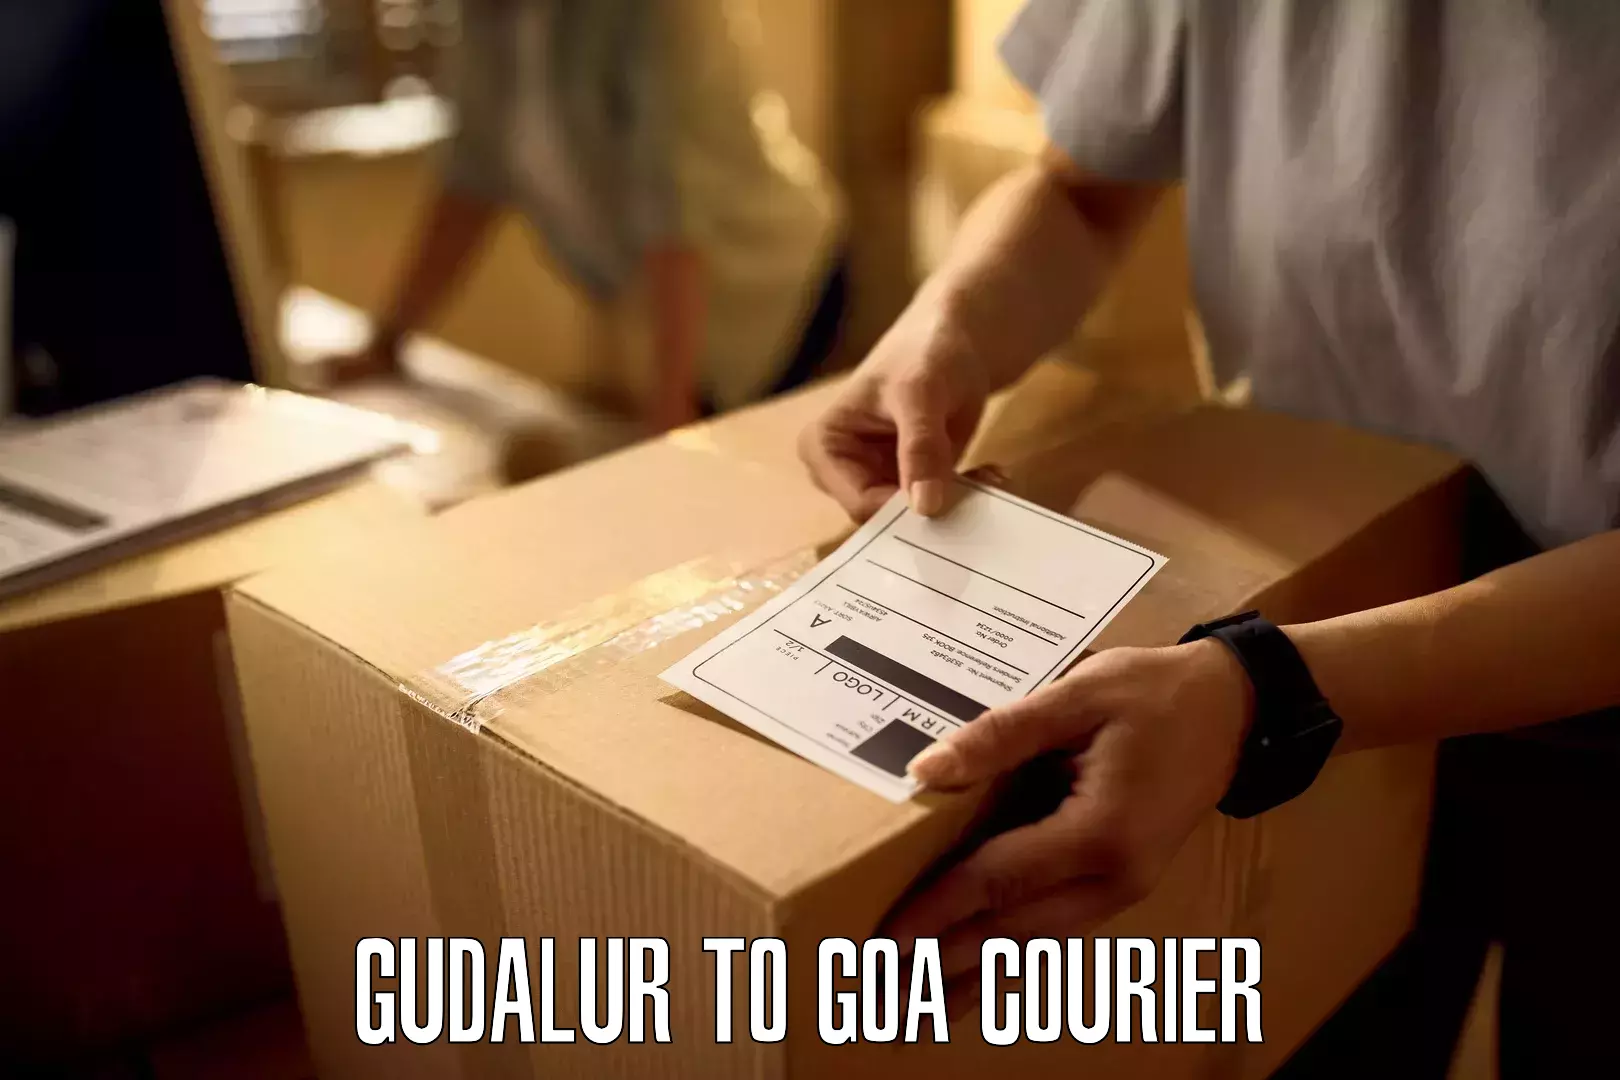 Reliable delivery network Gudalur to Margao